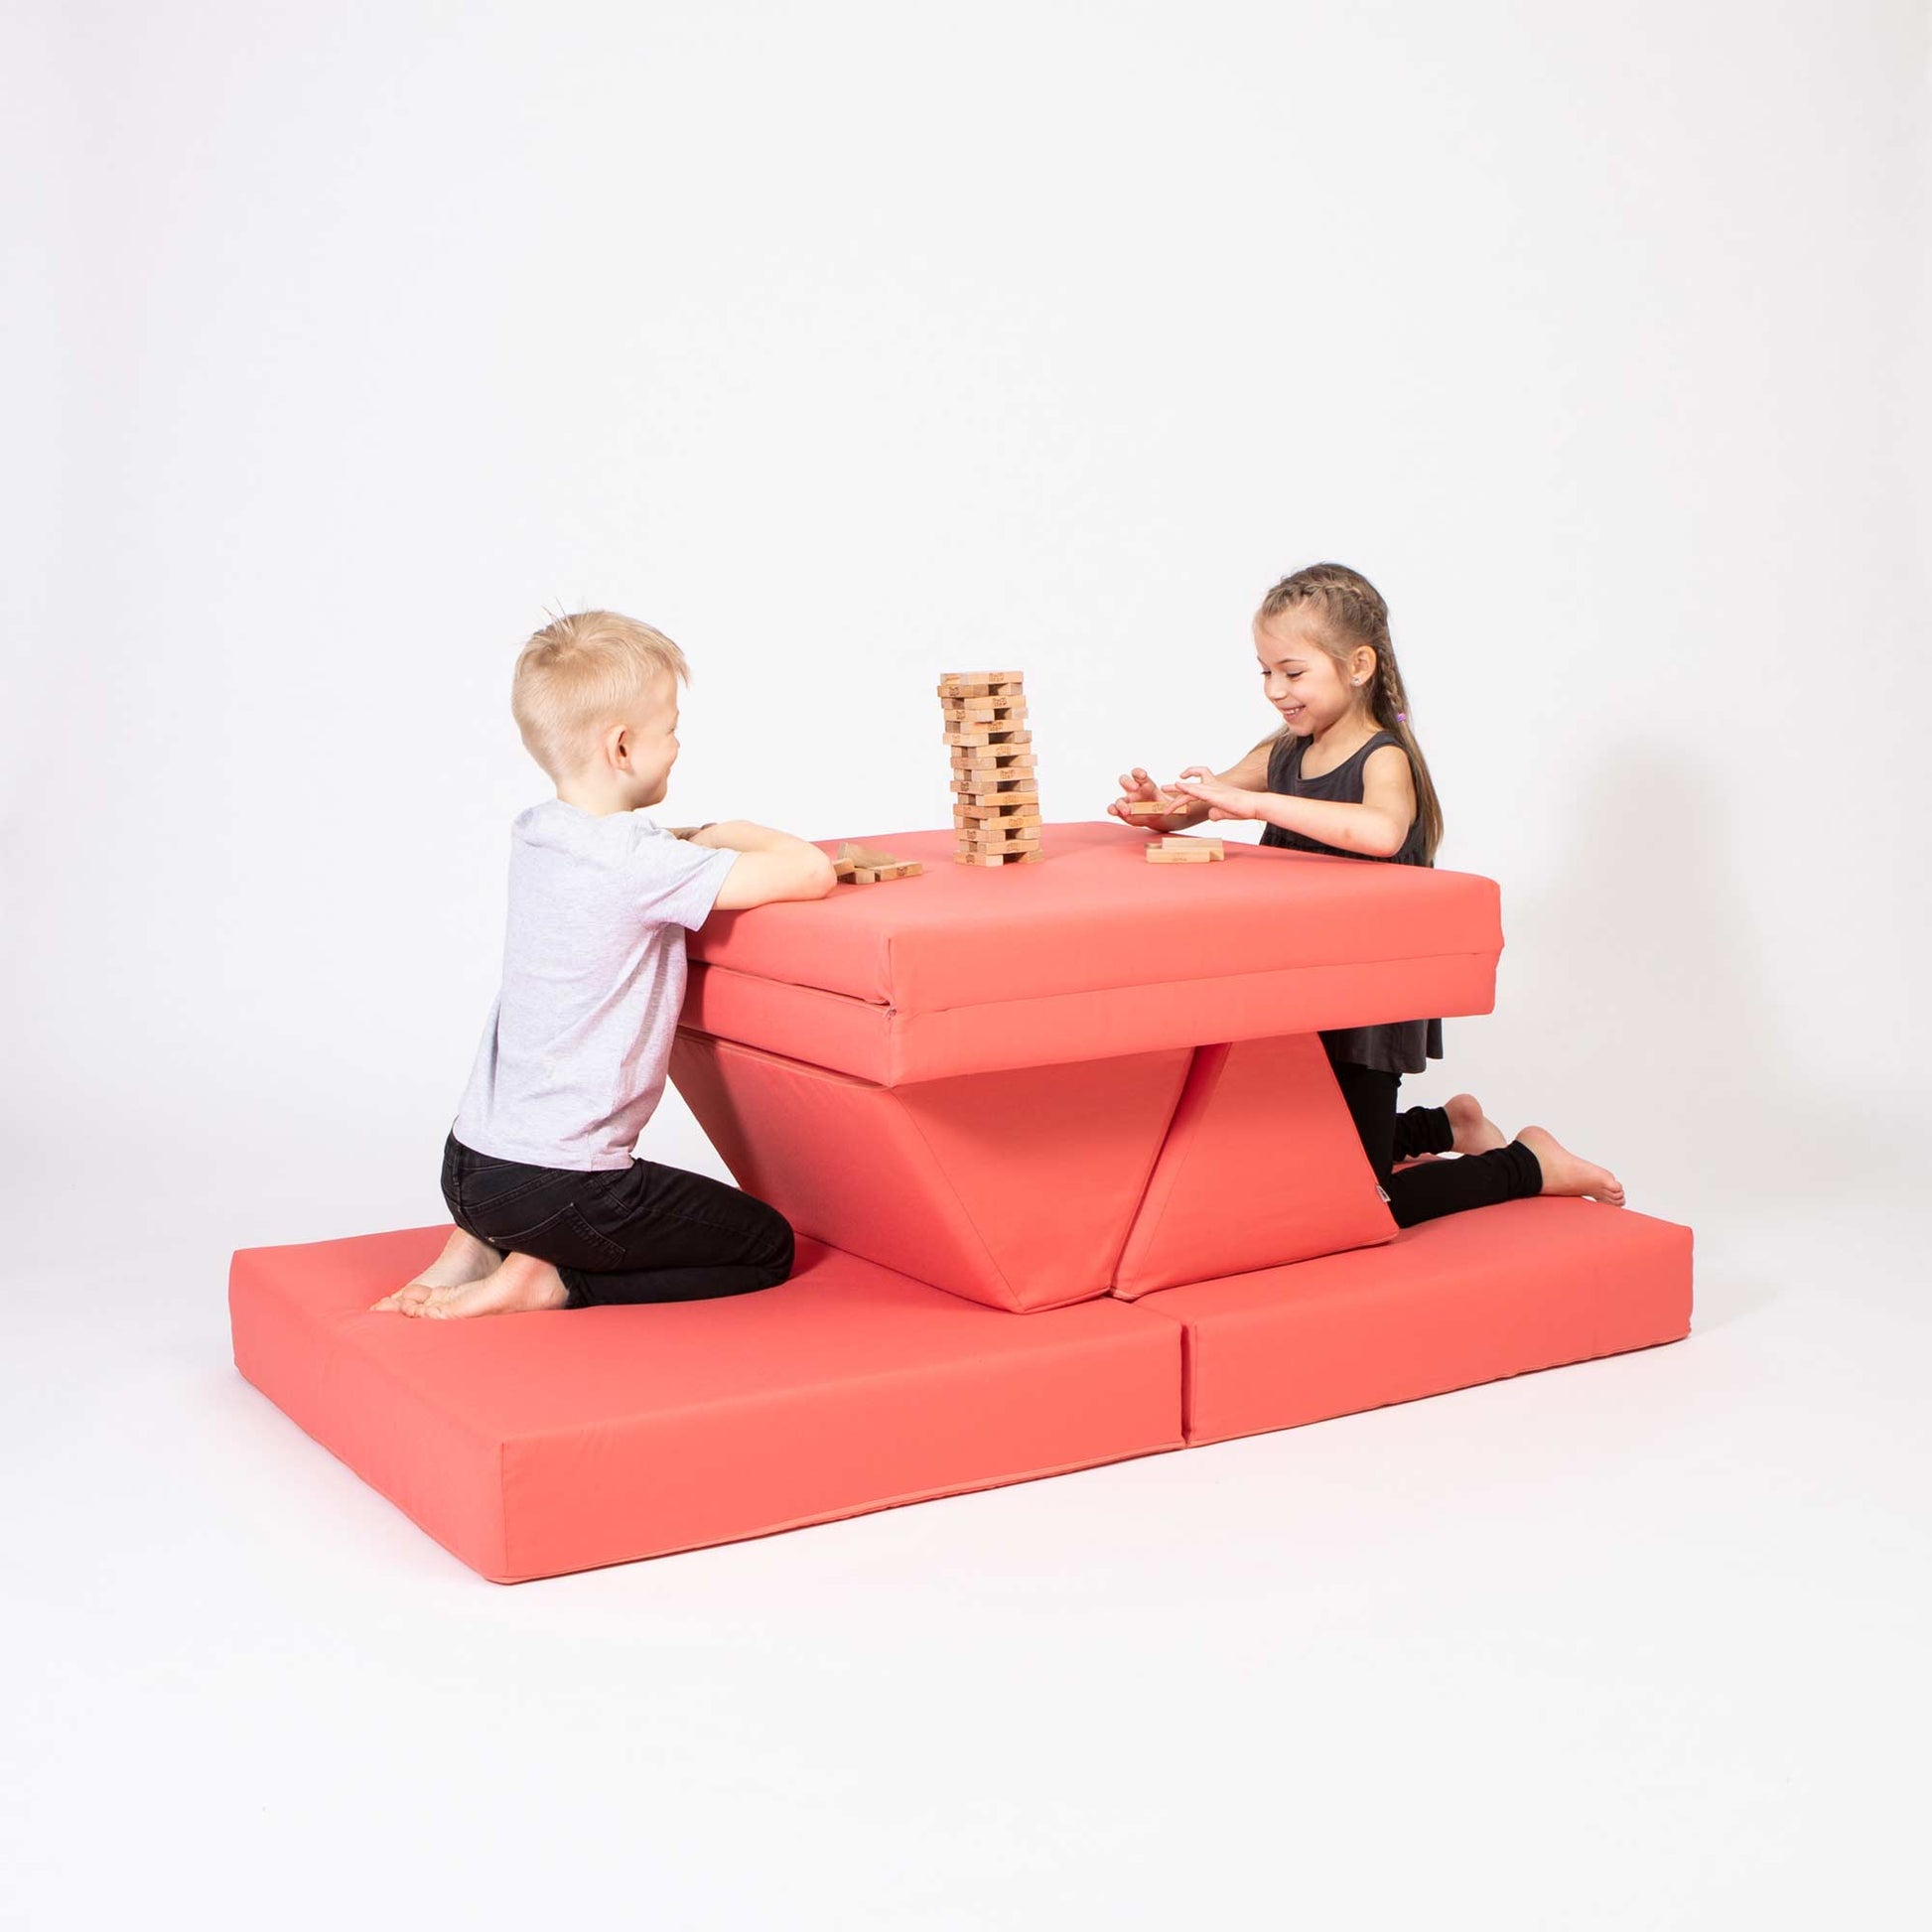 A boy and a girl playing jenga on their coral Monboxy sofa